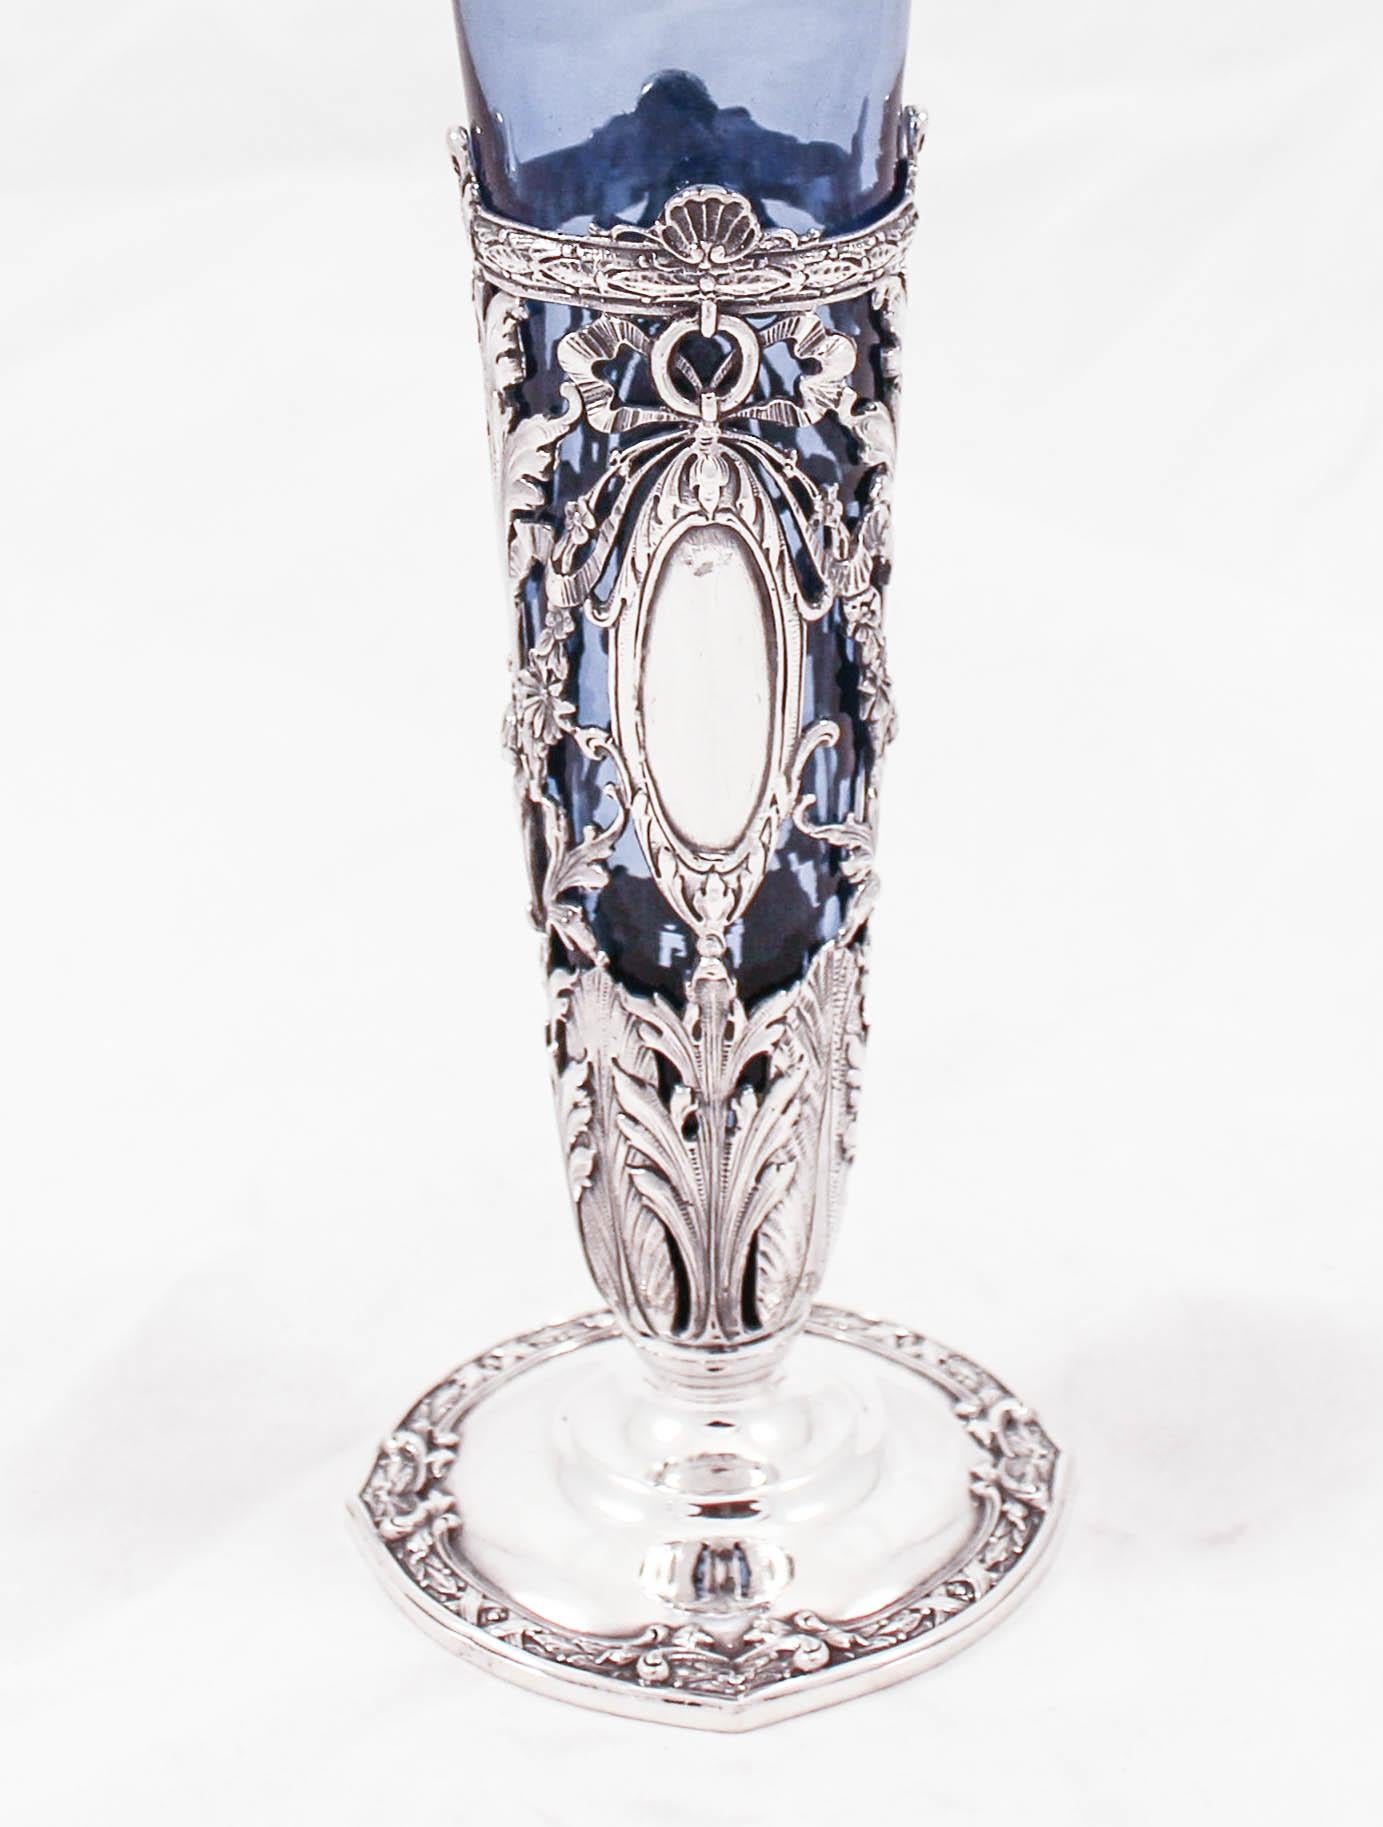 This very unique sterling silver vase has a blue glass liner. The workmanship on the sterling base is beautiful. Bows, flowers, and a cutout design gives it a rich feel and is a nod to old-world craftsmanship. The glass shows through the cutout and